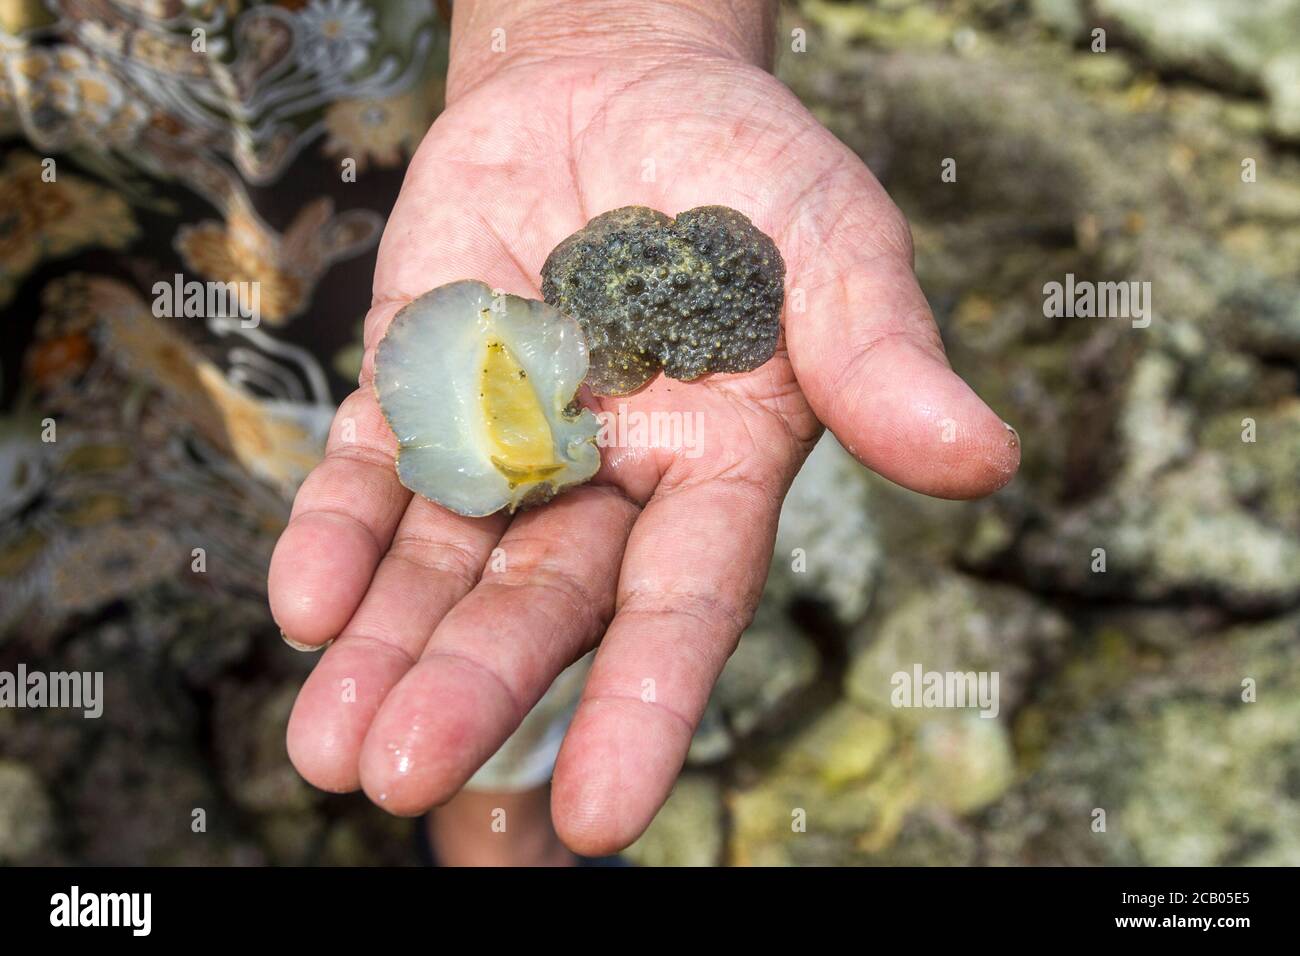 Both sides of an edible sea slug. Local people pry these from rocks at low tide, chip them, boil them and then add coconut milk. The taste is somewhat like calamari. Popular on tropical Pacific islands. Kosrae, Micronesia. Stock Photo